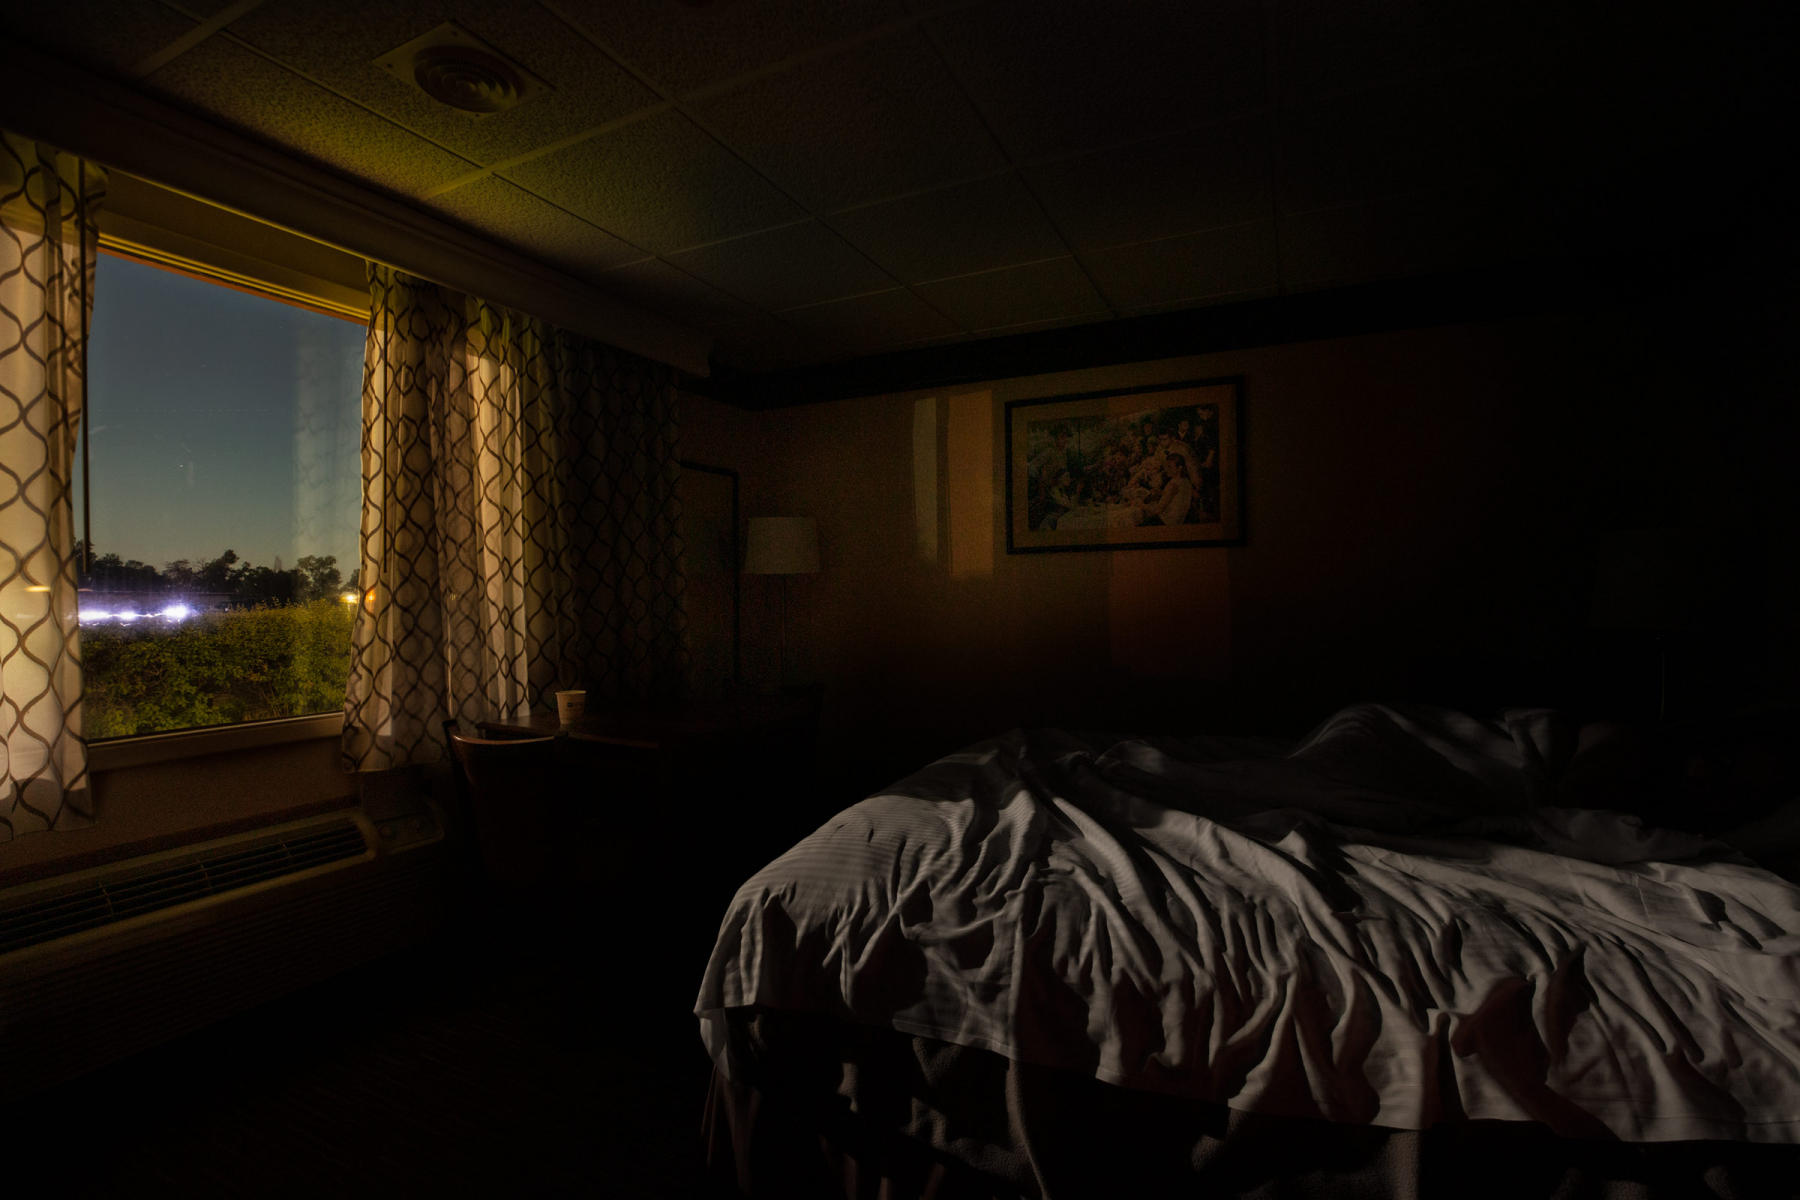 Moonlight in my motel room.  The Best Western Movie Manner is a wonderful motel to stay when you are visiting southern Colorado. I fell in love with the light. : Visiting Mom : New York City based photographer and video specializing in portrait corporate portraits, video, editorial stories for on location and architectural photography